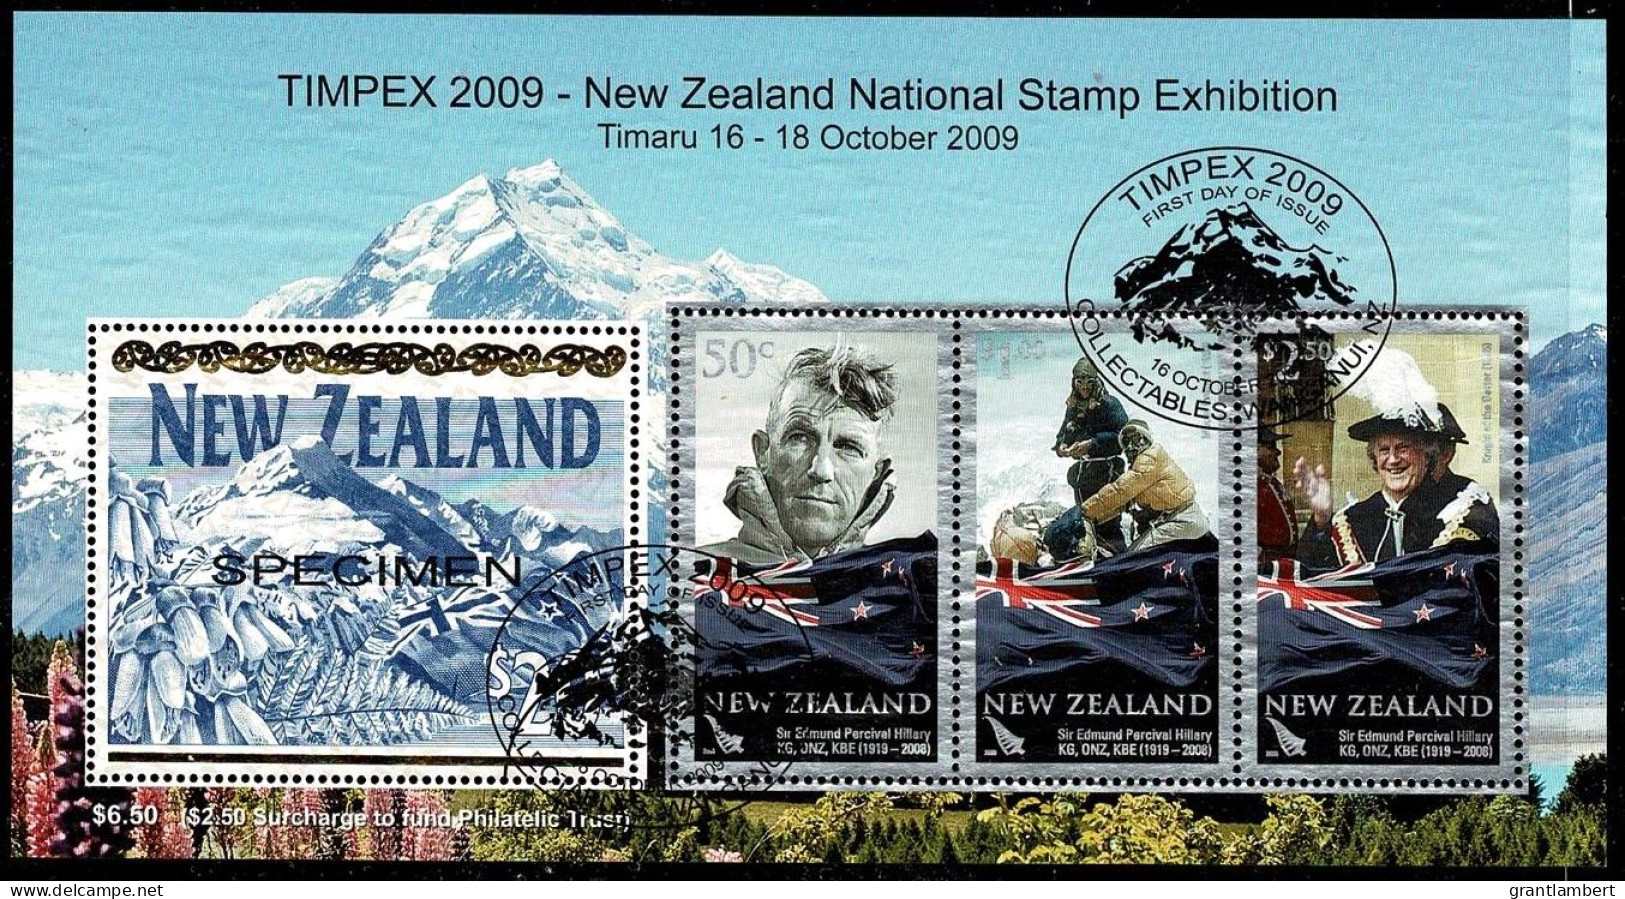 New Zealand 2009 TIMPEX 2009 Exhibition  Minisheet Used - Used Stamps